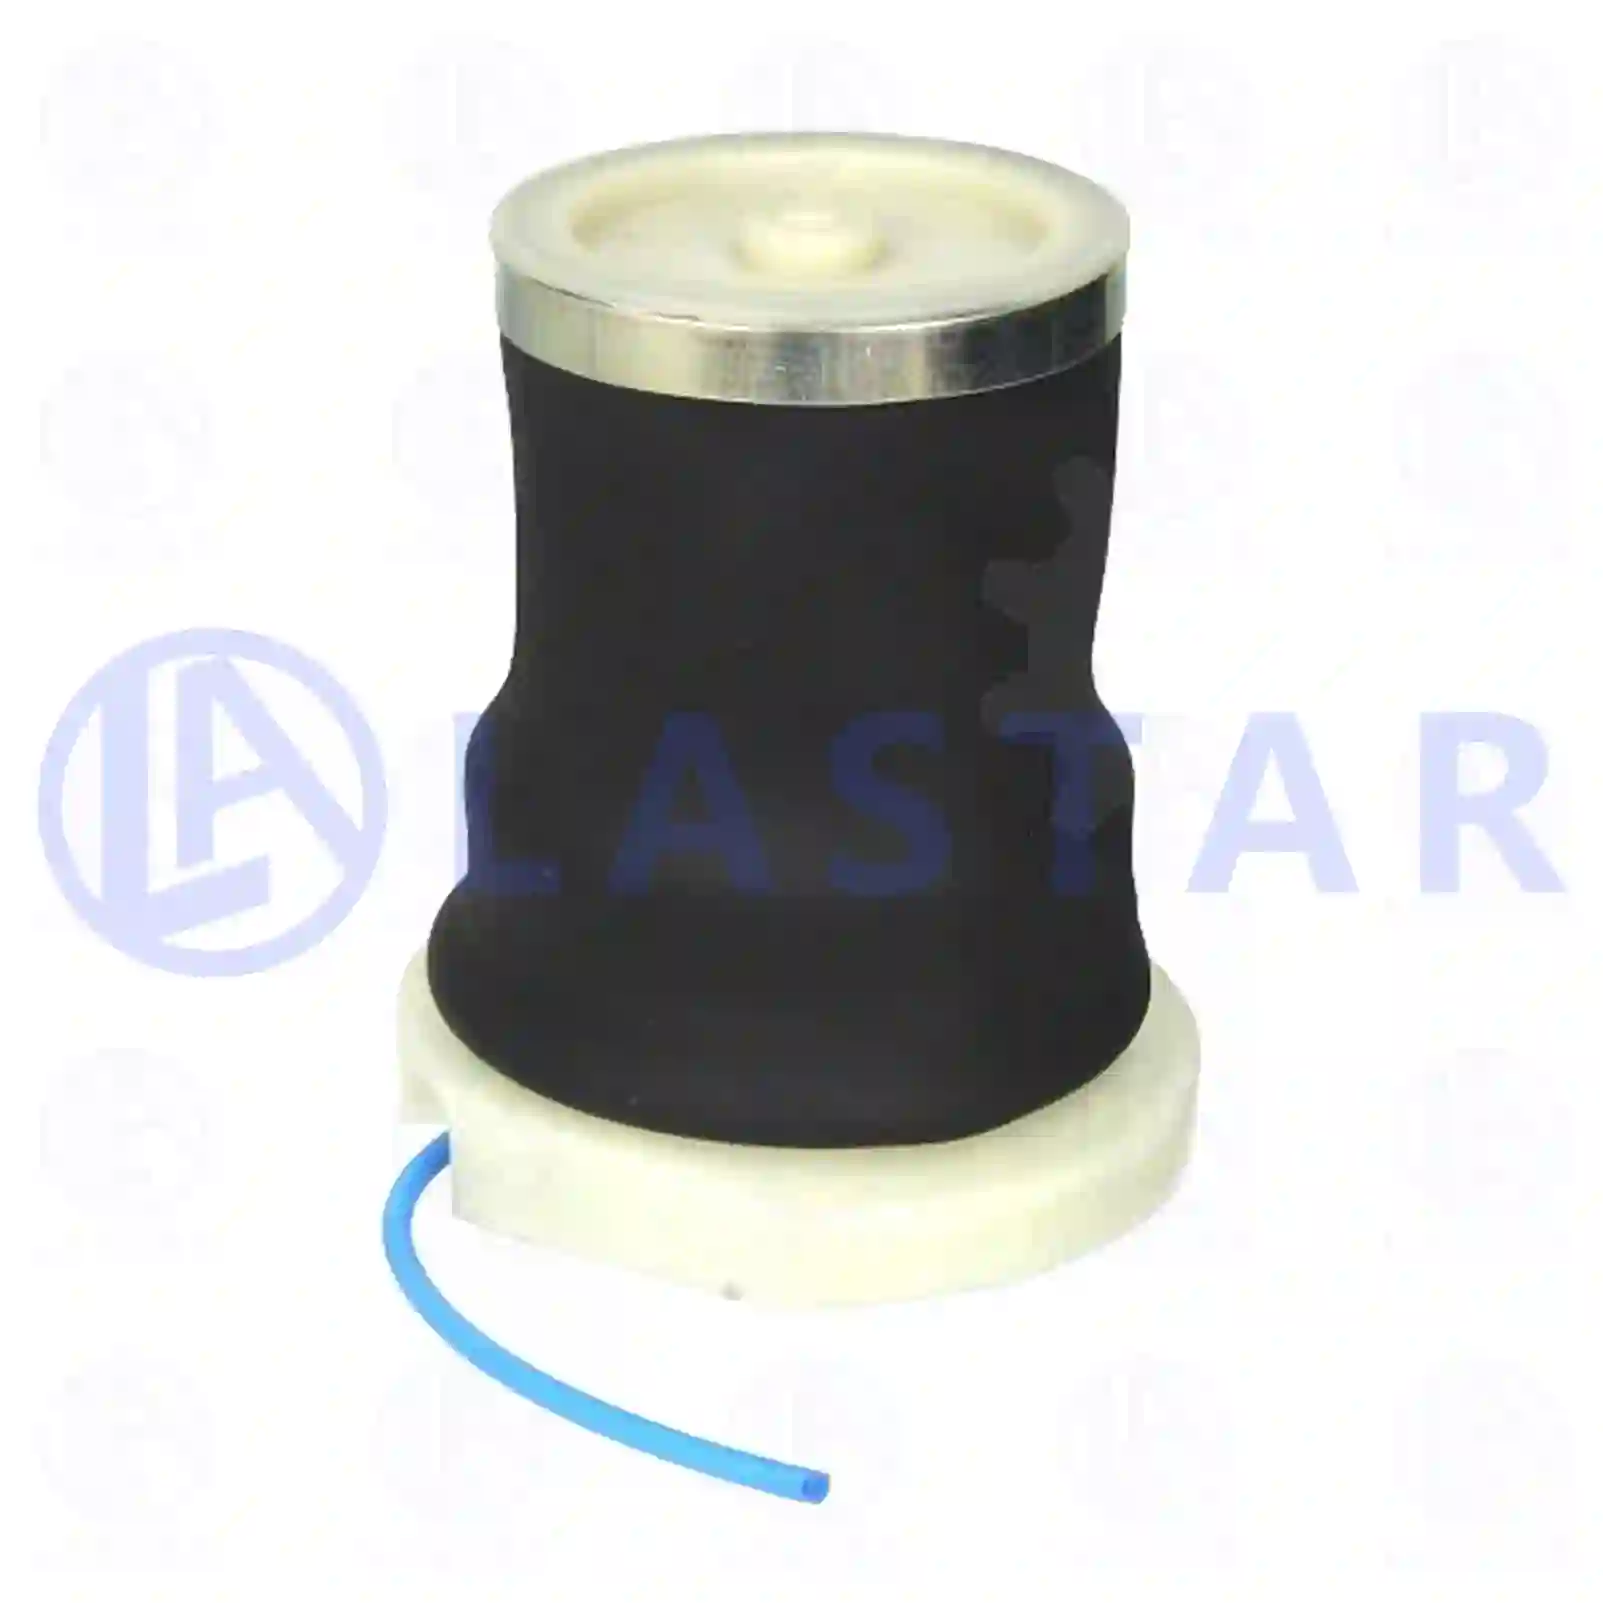 Air spring, seat, 77735415, 5001836461, 93161385, 5001836461, 3090128, 3090585 ||  77735415 Lastar Spare Part | Truck Spare Parts, Auotomotive Spare Parts Air spring, seat, 77735415, 5001836461, 93161385, 5001836461, 3090128, 3090585 ||  77735415 Lastar Spare Part | Truck Spare Parts, Auotomotive Spare Parts